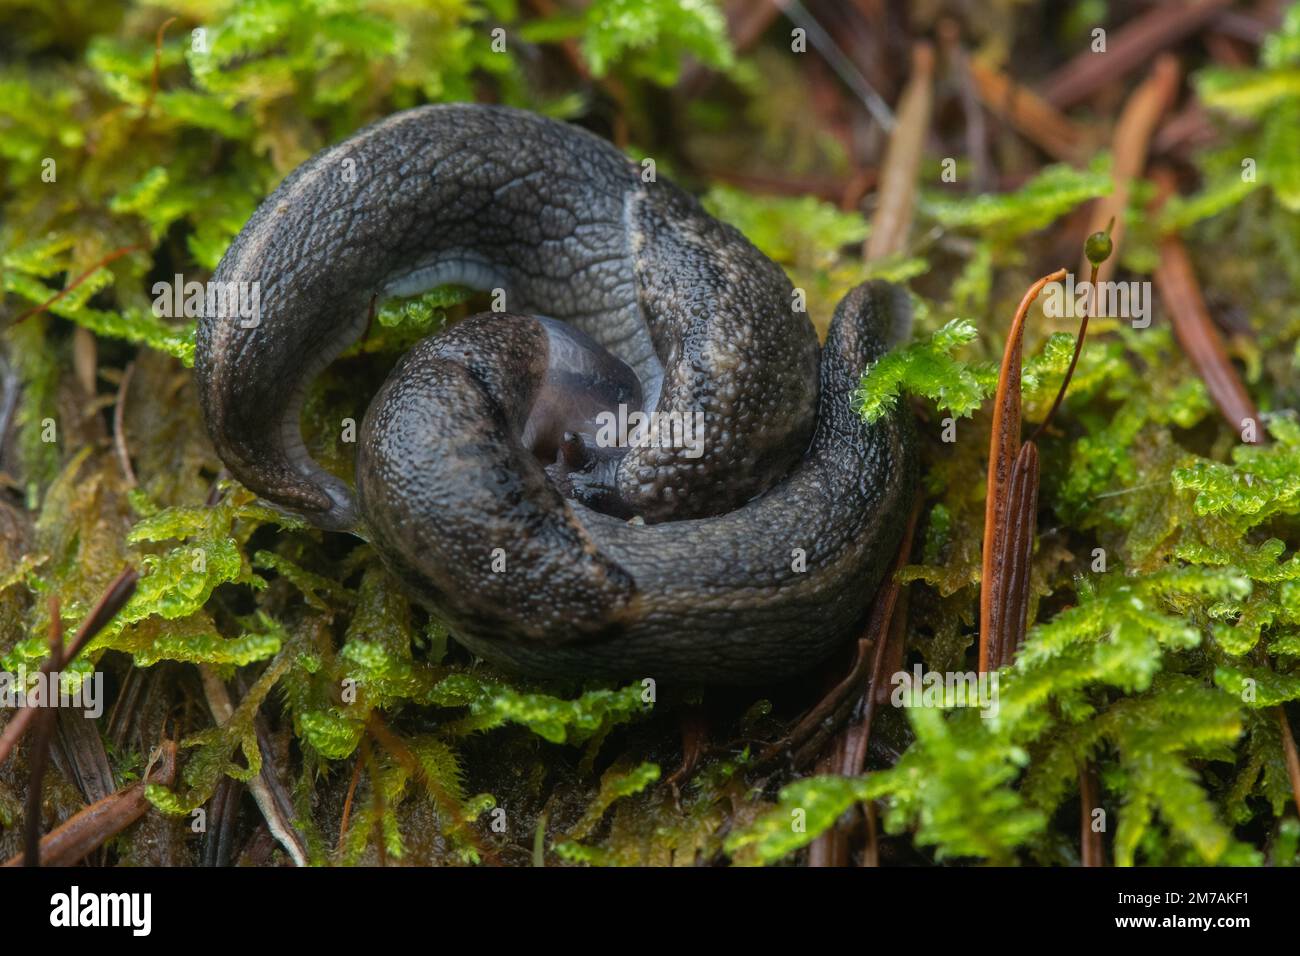 A pair of mating slugs in Angelo coast range reserve in Mendocino county, Northern California, USA. Stock Photo